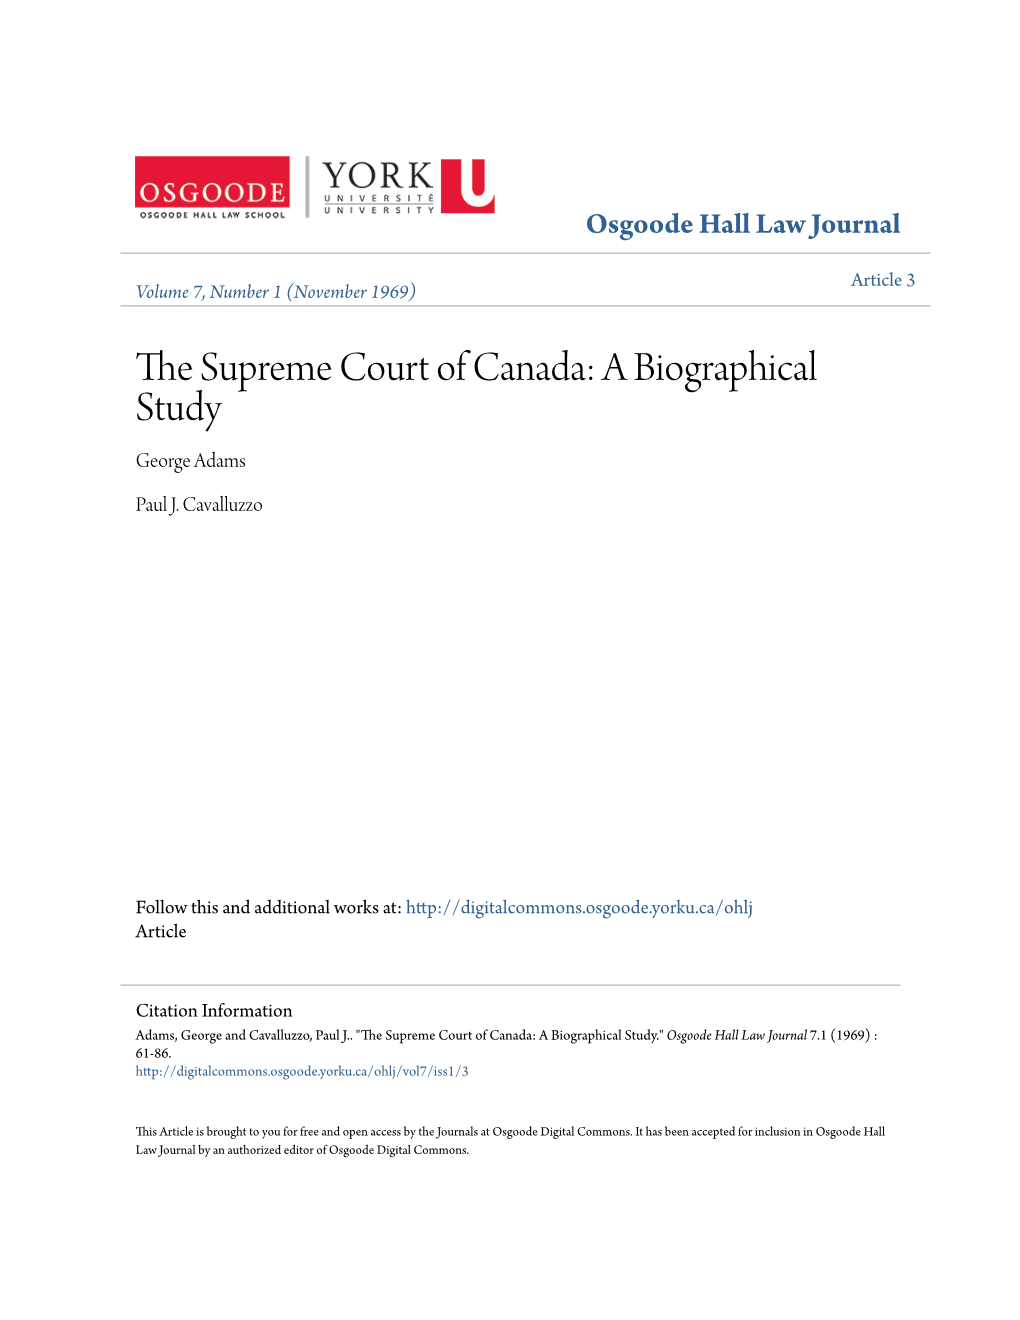 The Supreme Court of Canada a Biographical Study George Adams and Paul J